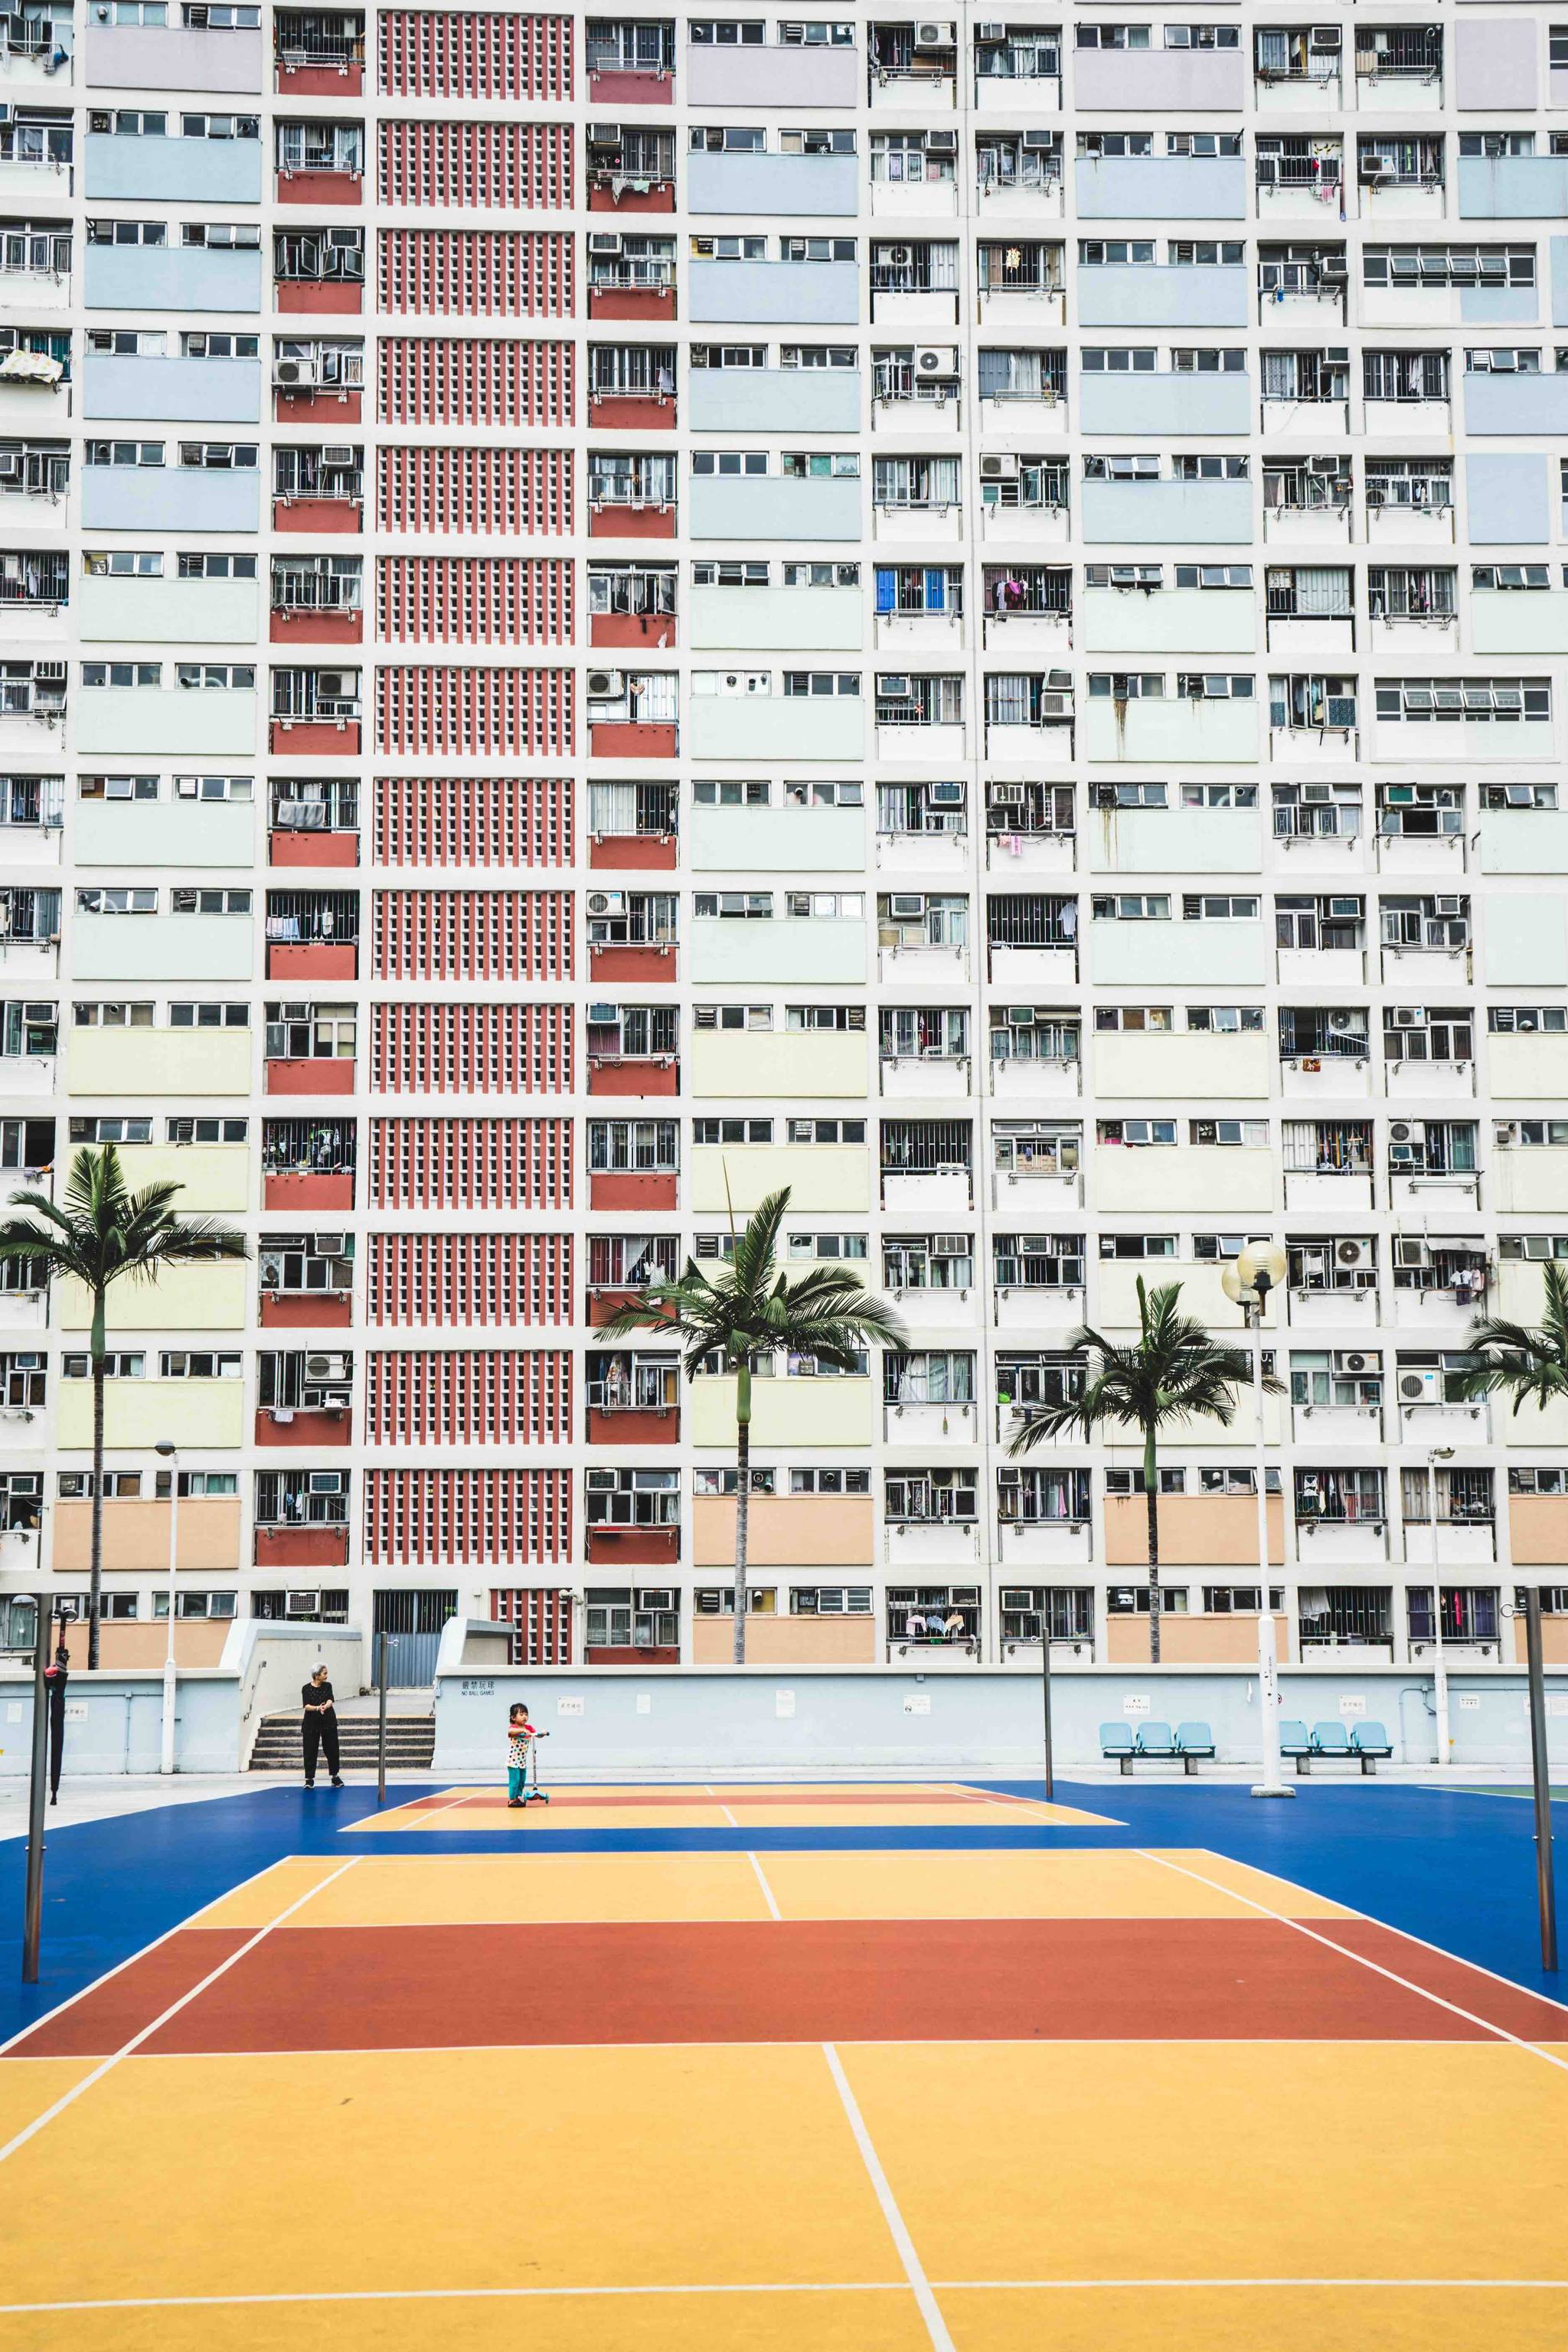 Hong Kongers don't have enough leisure space